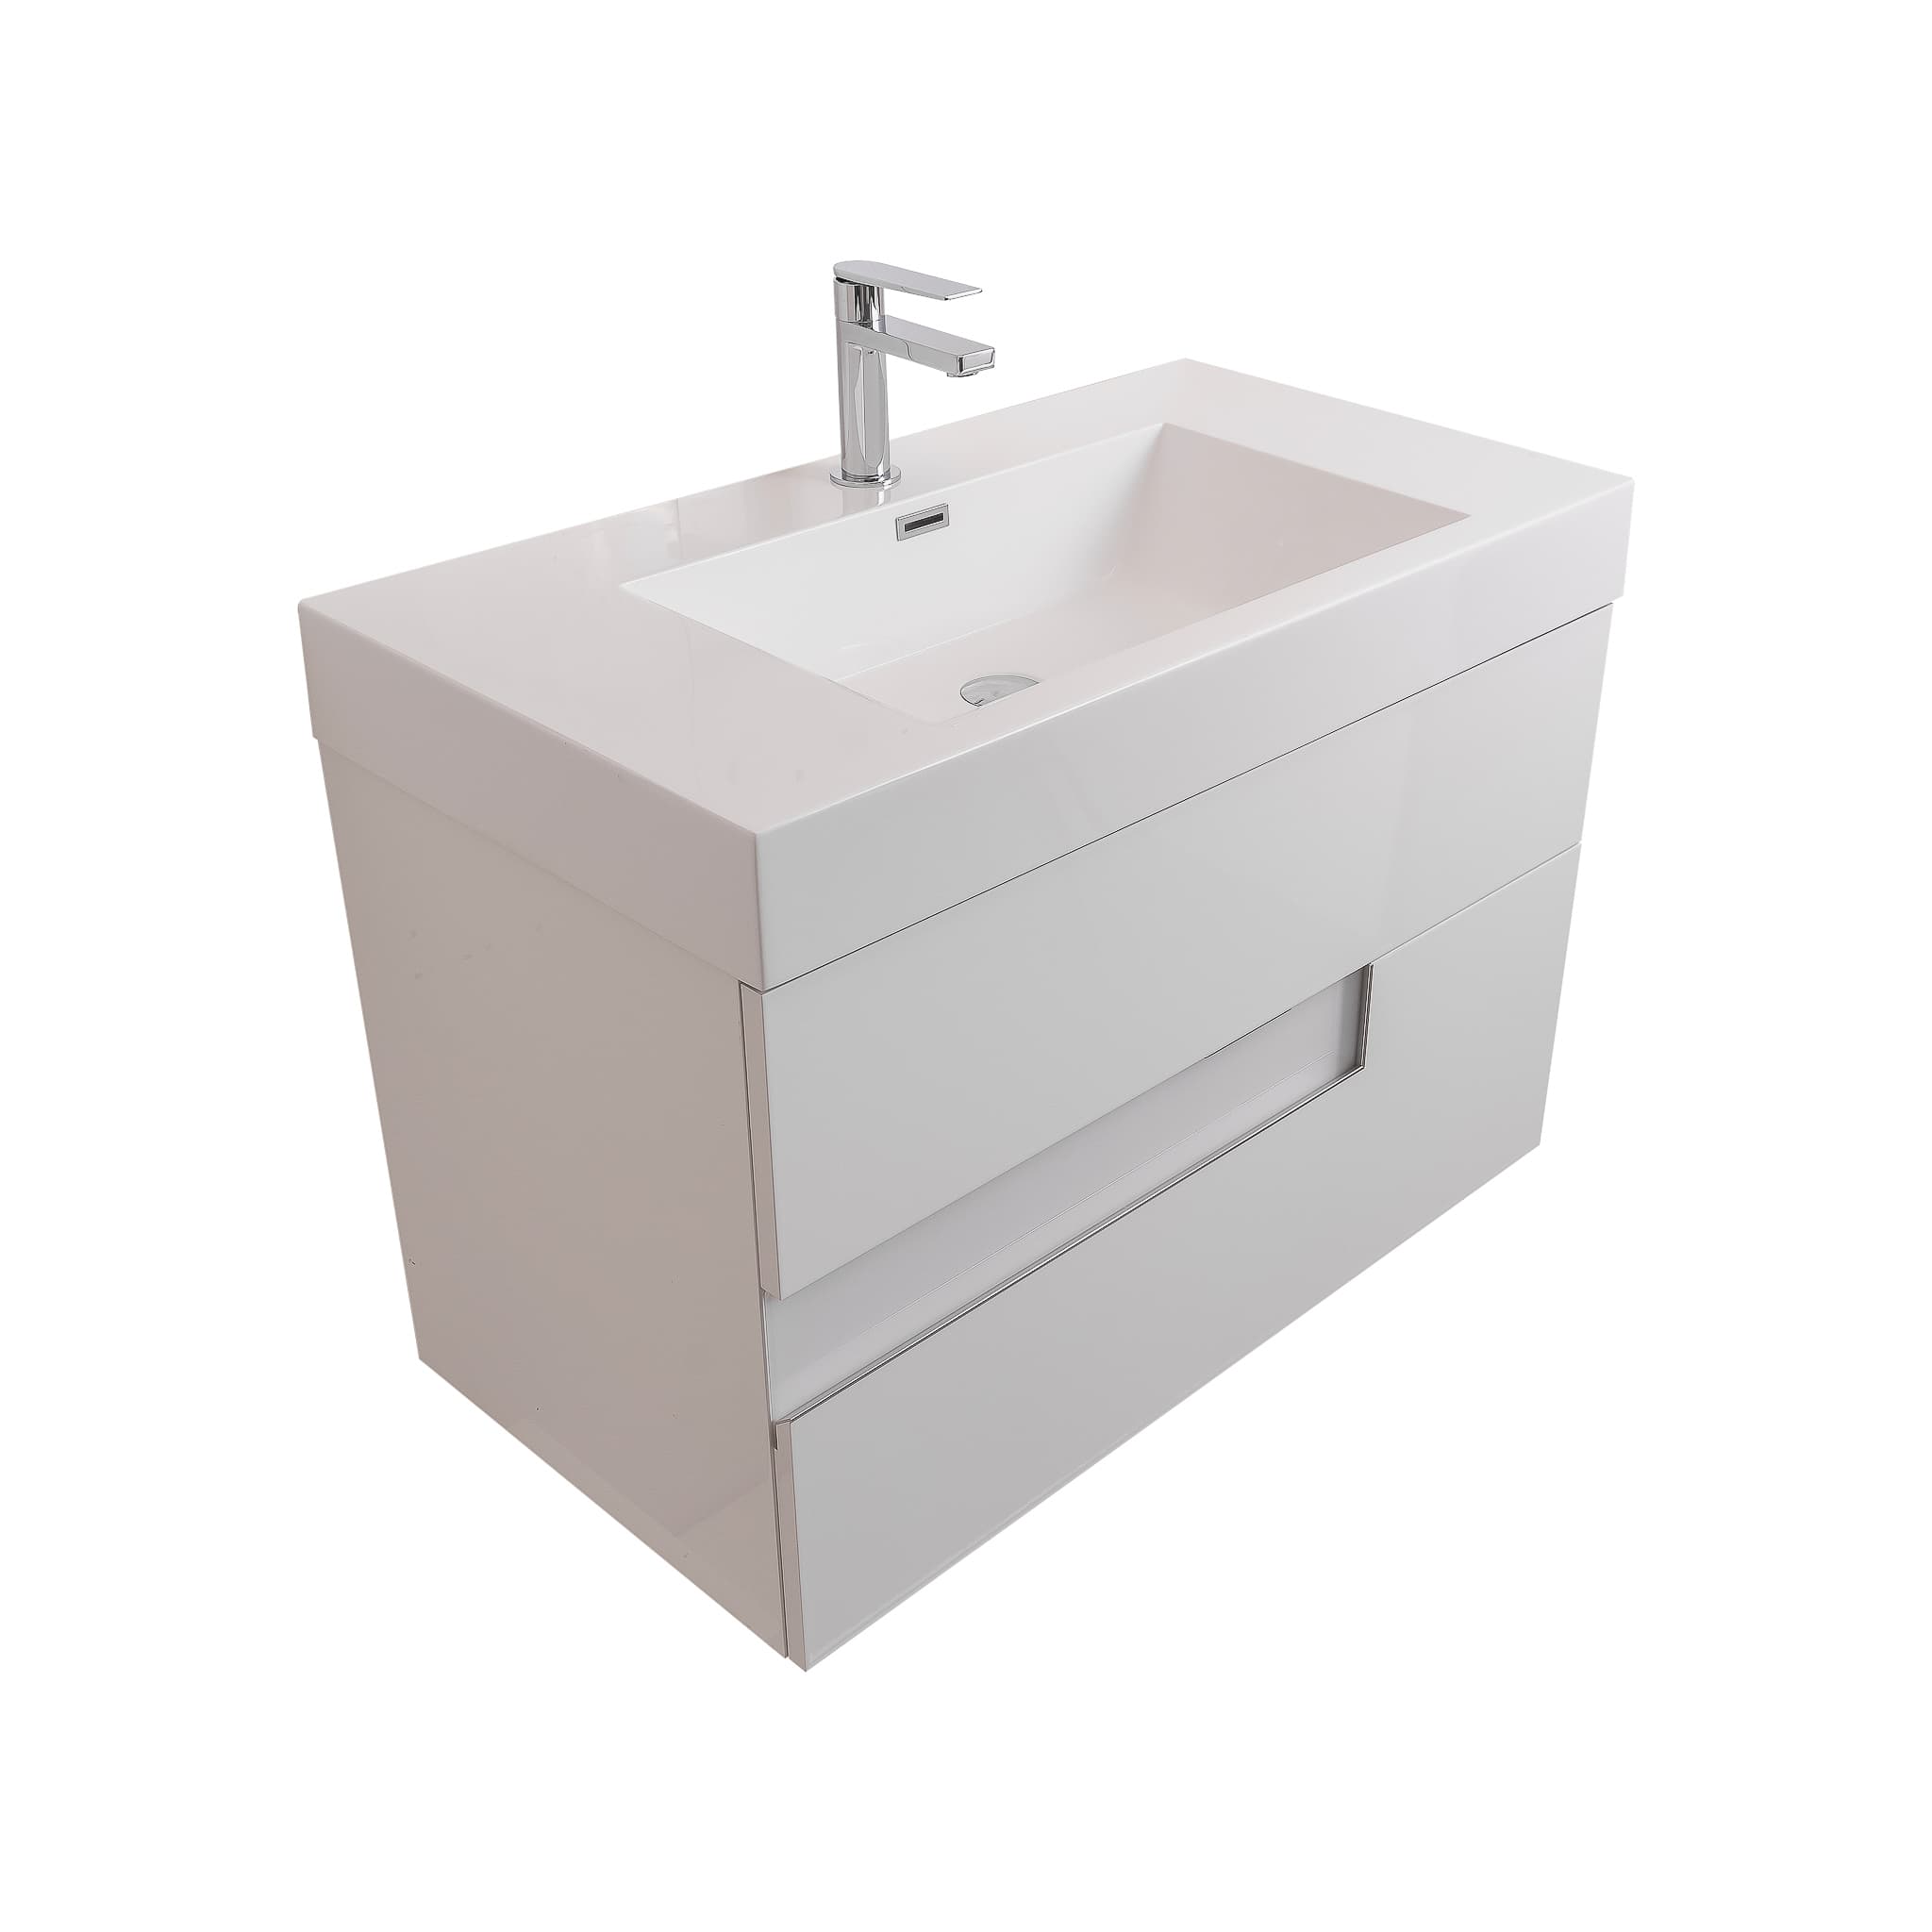 Vision 39.5 White High Gloss Cabinet, Square Cultured Marble Sink, Wall Mounted Modern Vanity Set